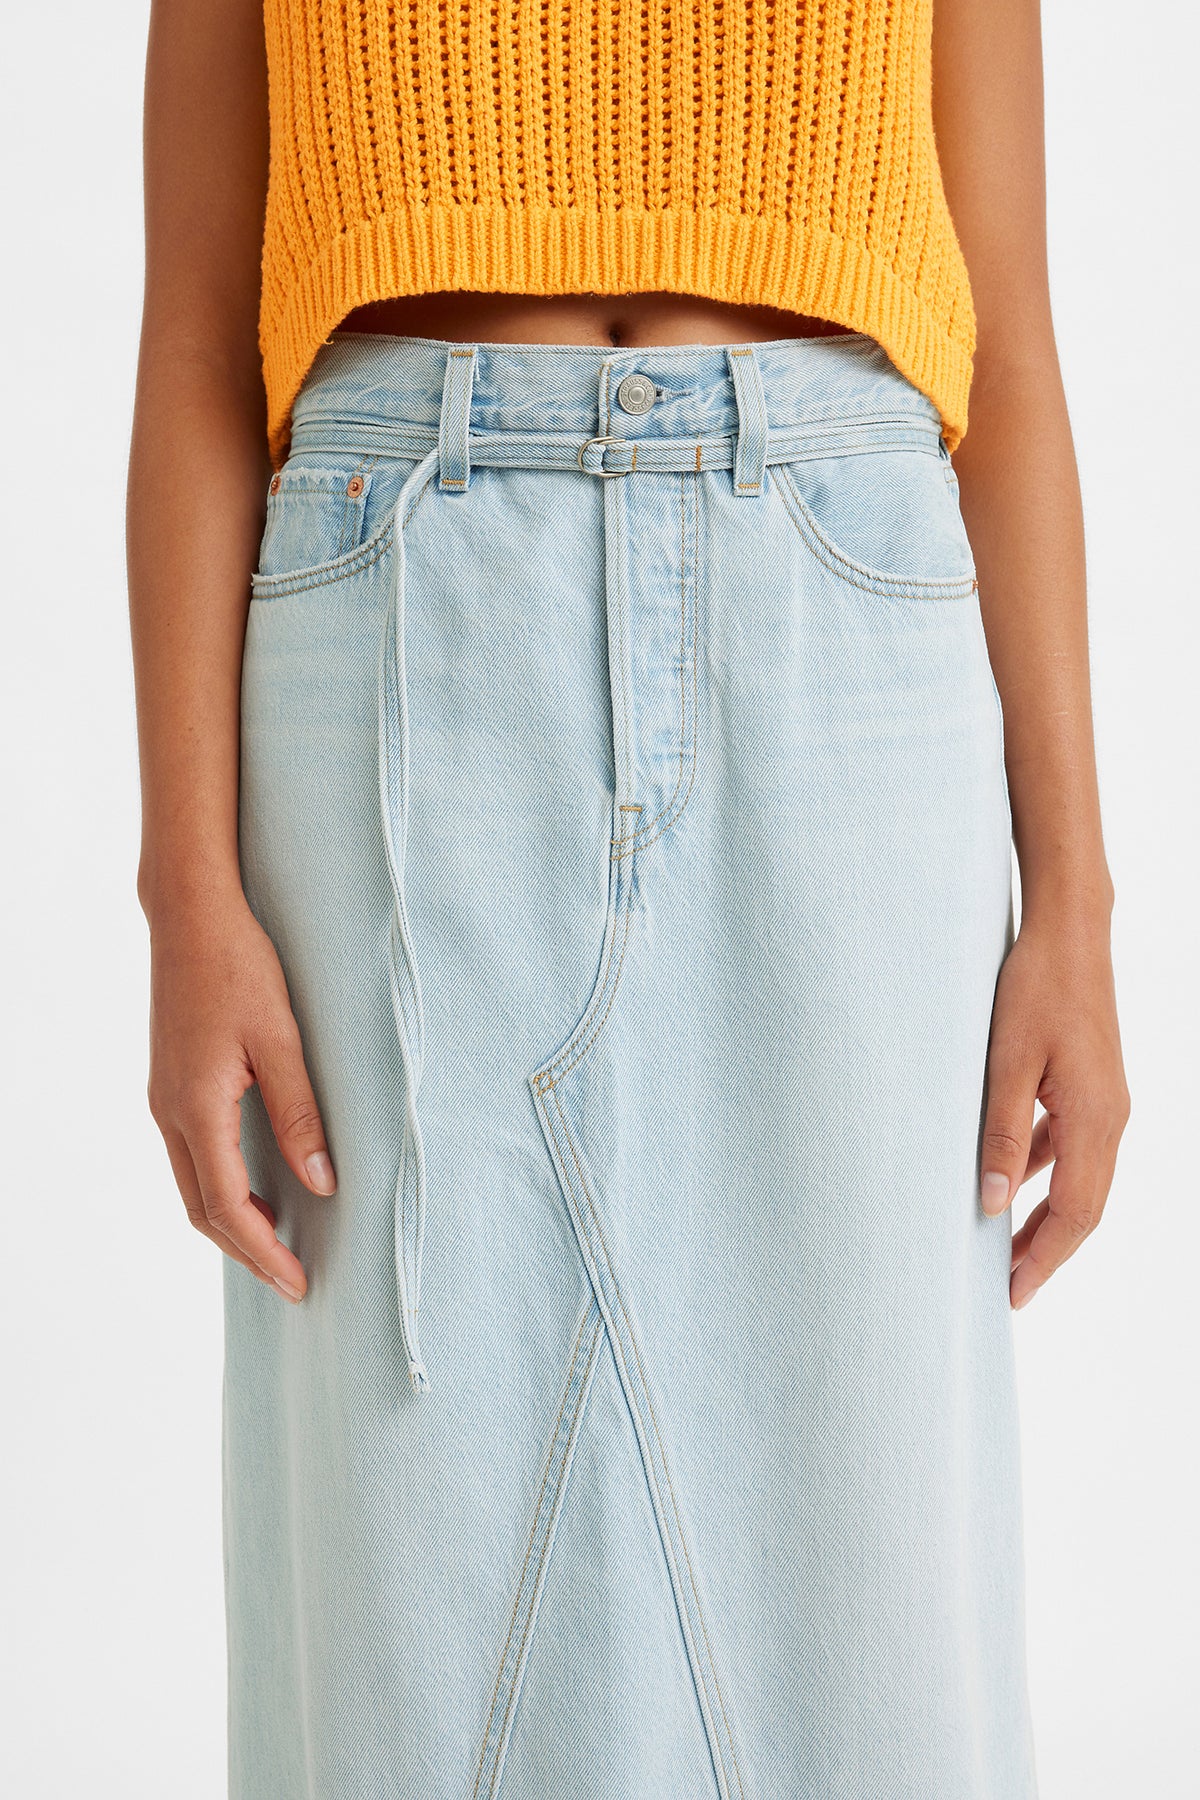 Levi's Long Icon Skirt // My So Called Pant